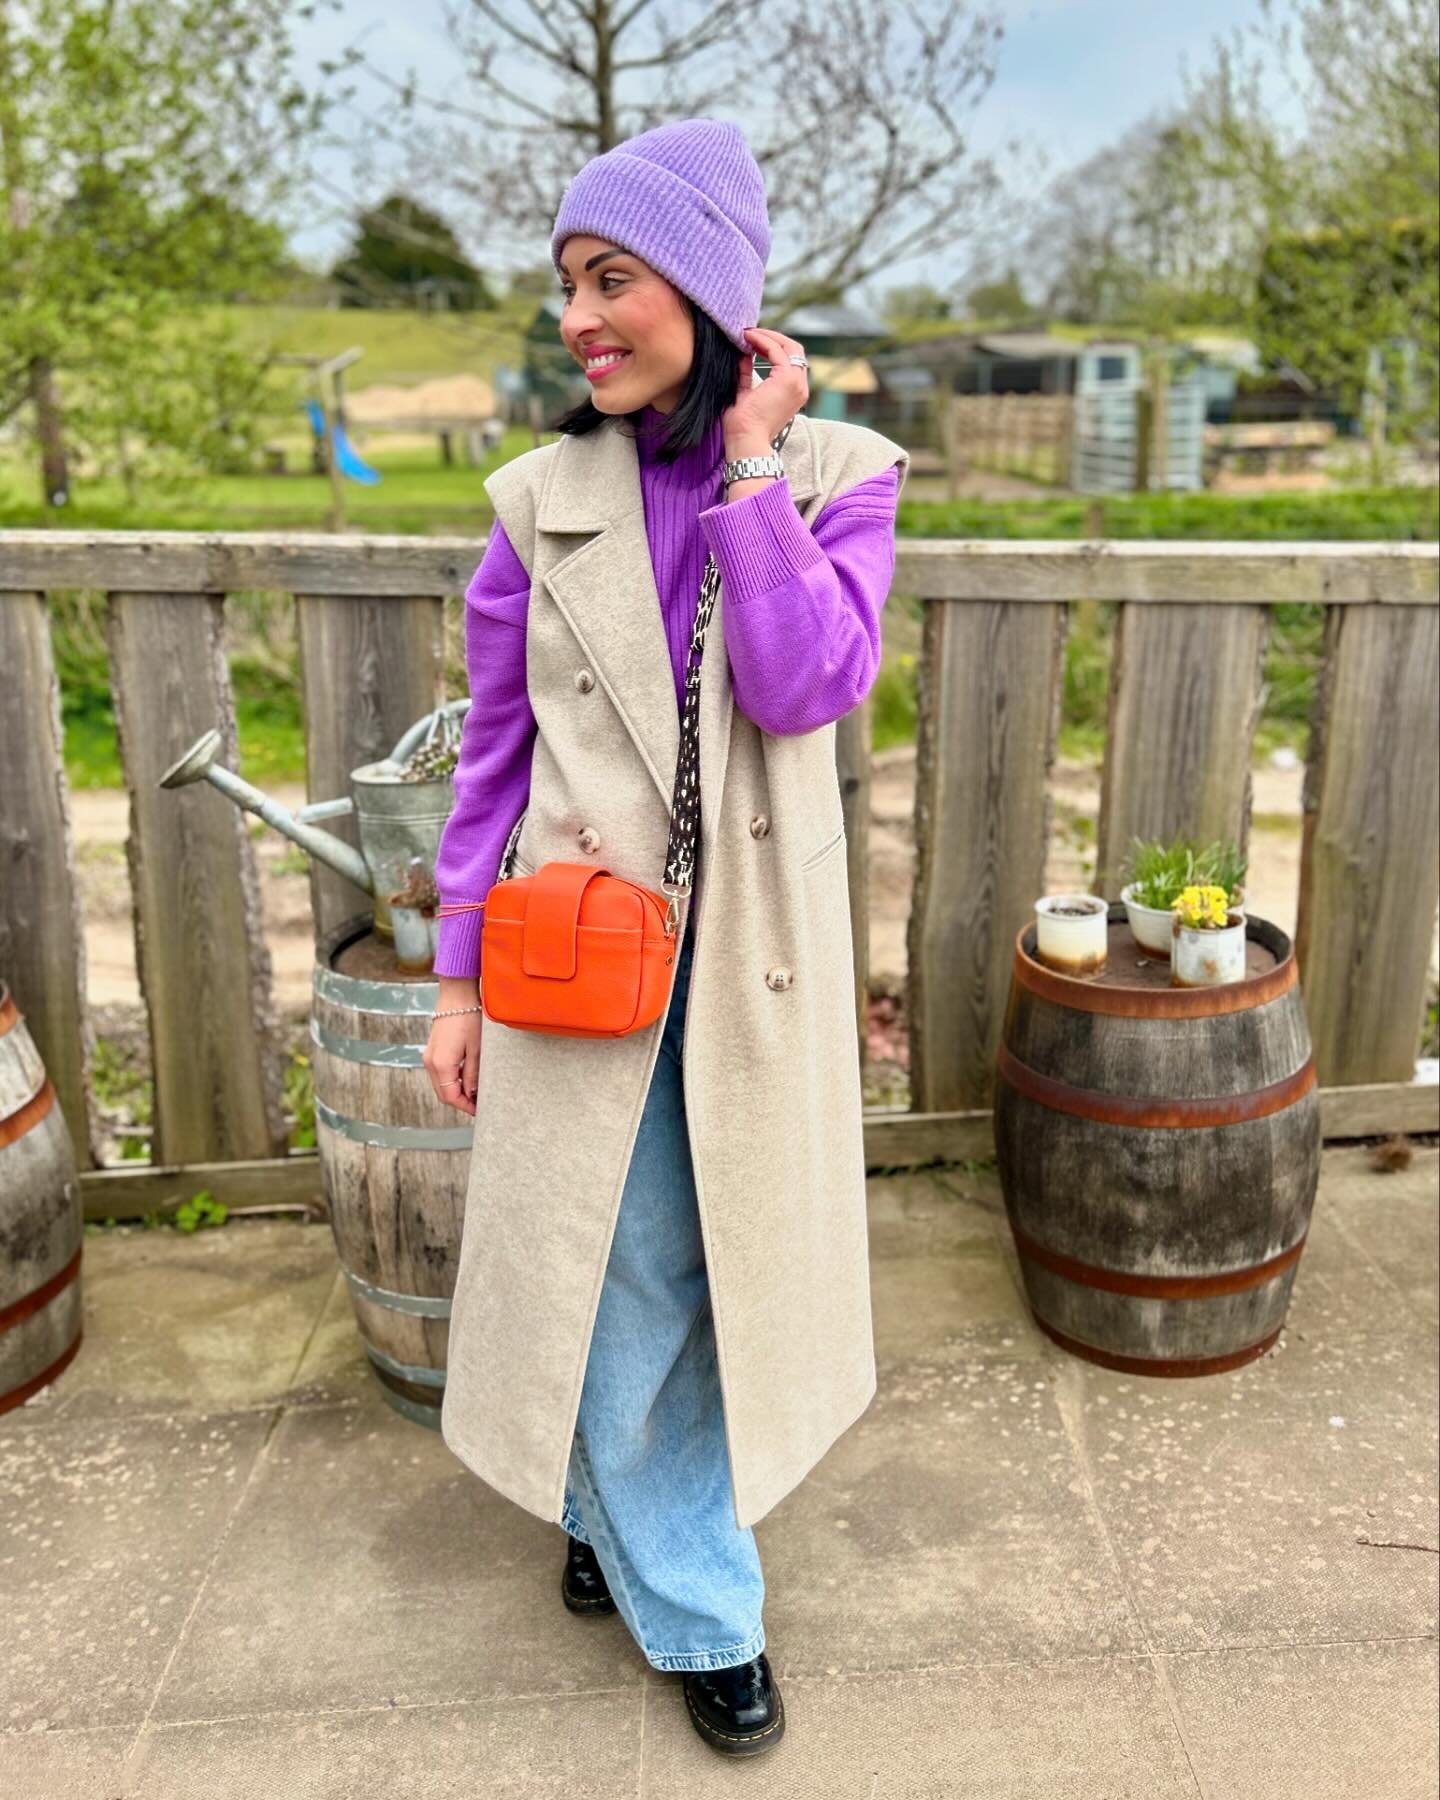 Casual bestie brunch vibes with Nutella and candied hazelnuts pancakes for the win 👯&zwj;♀️🥞💜
.
Hat &amp; jeans @marksandspencer 
Jumper &amp; coat @riverisland 
Boots @drmartensofficial 
Bag @oliverbonas 
.
#brunchvibes #casualstyle #brunchoutfit